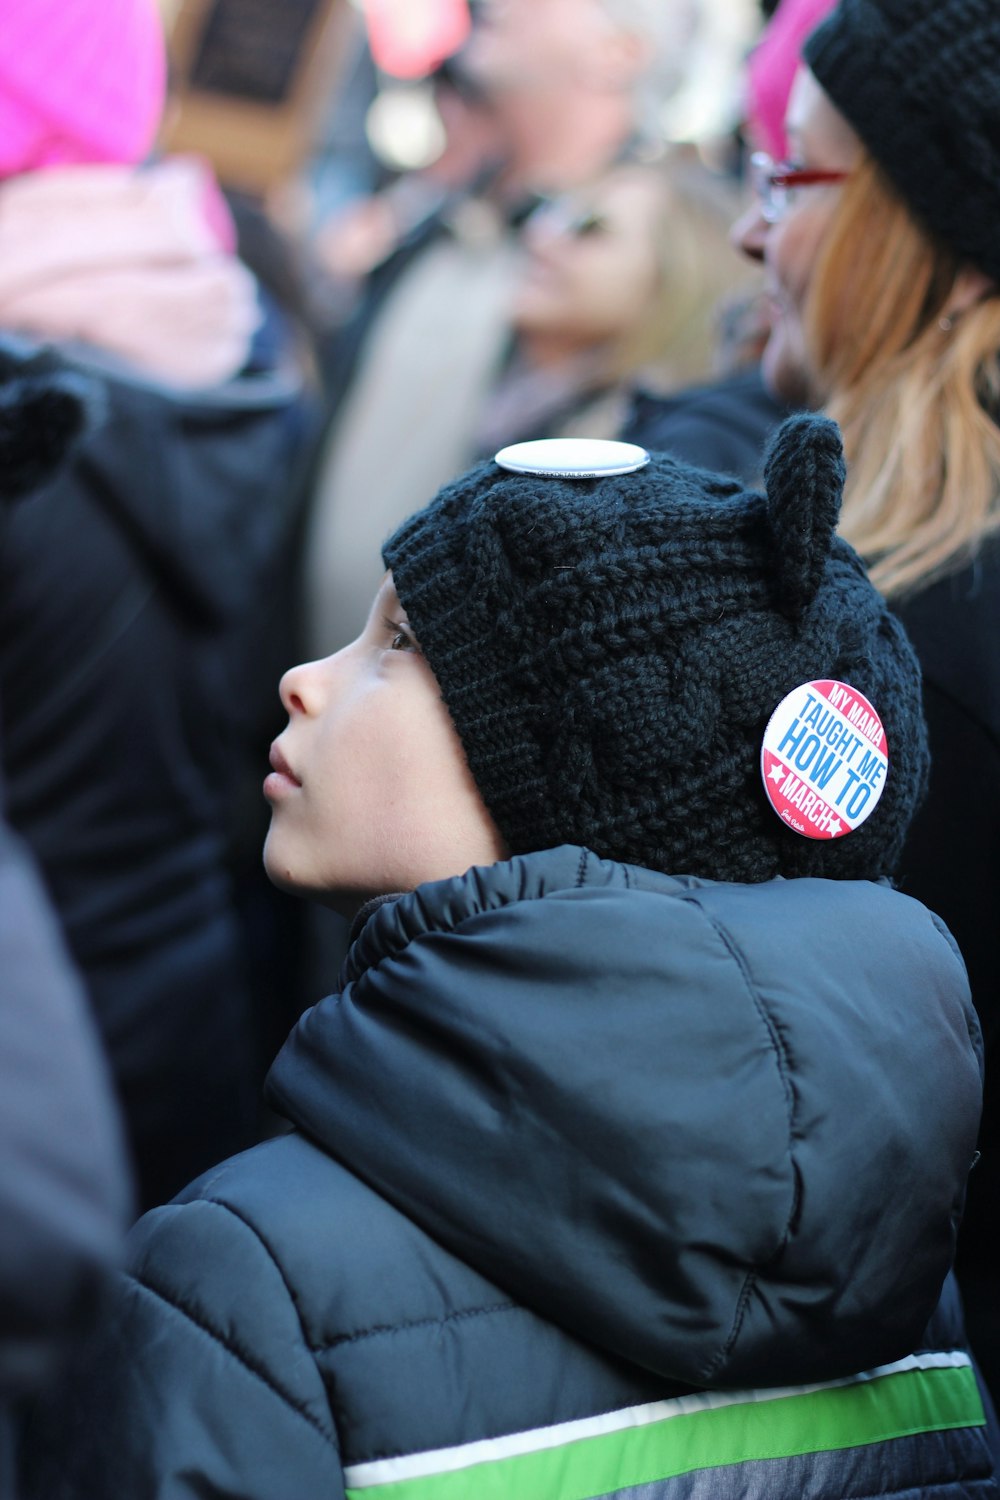 close up photo of boy's back sitting looking to the left wearing knit cap and hooded jacket